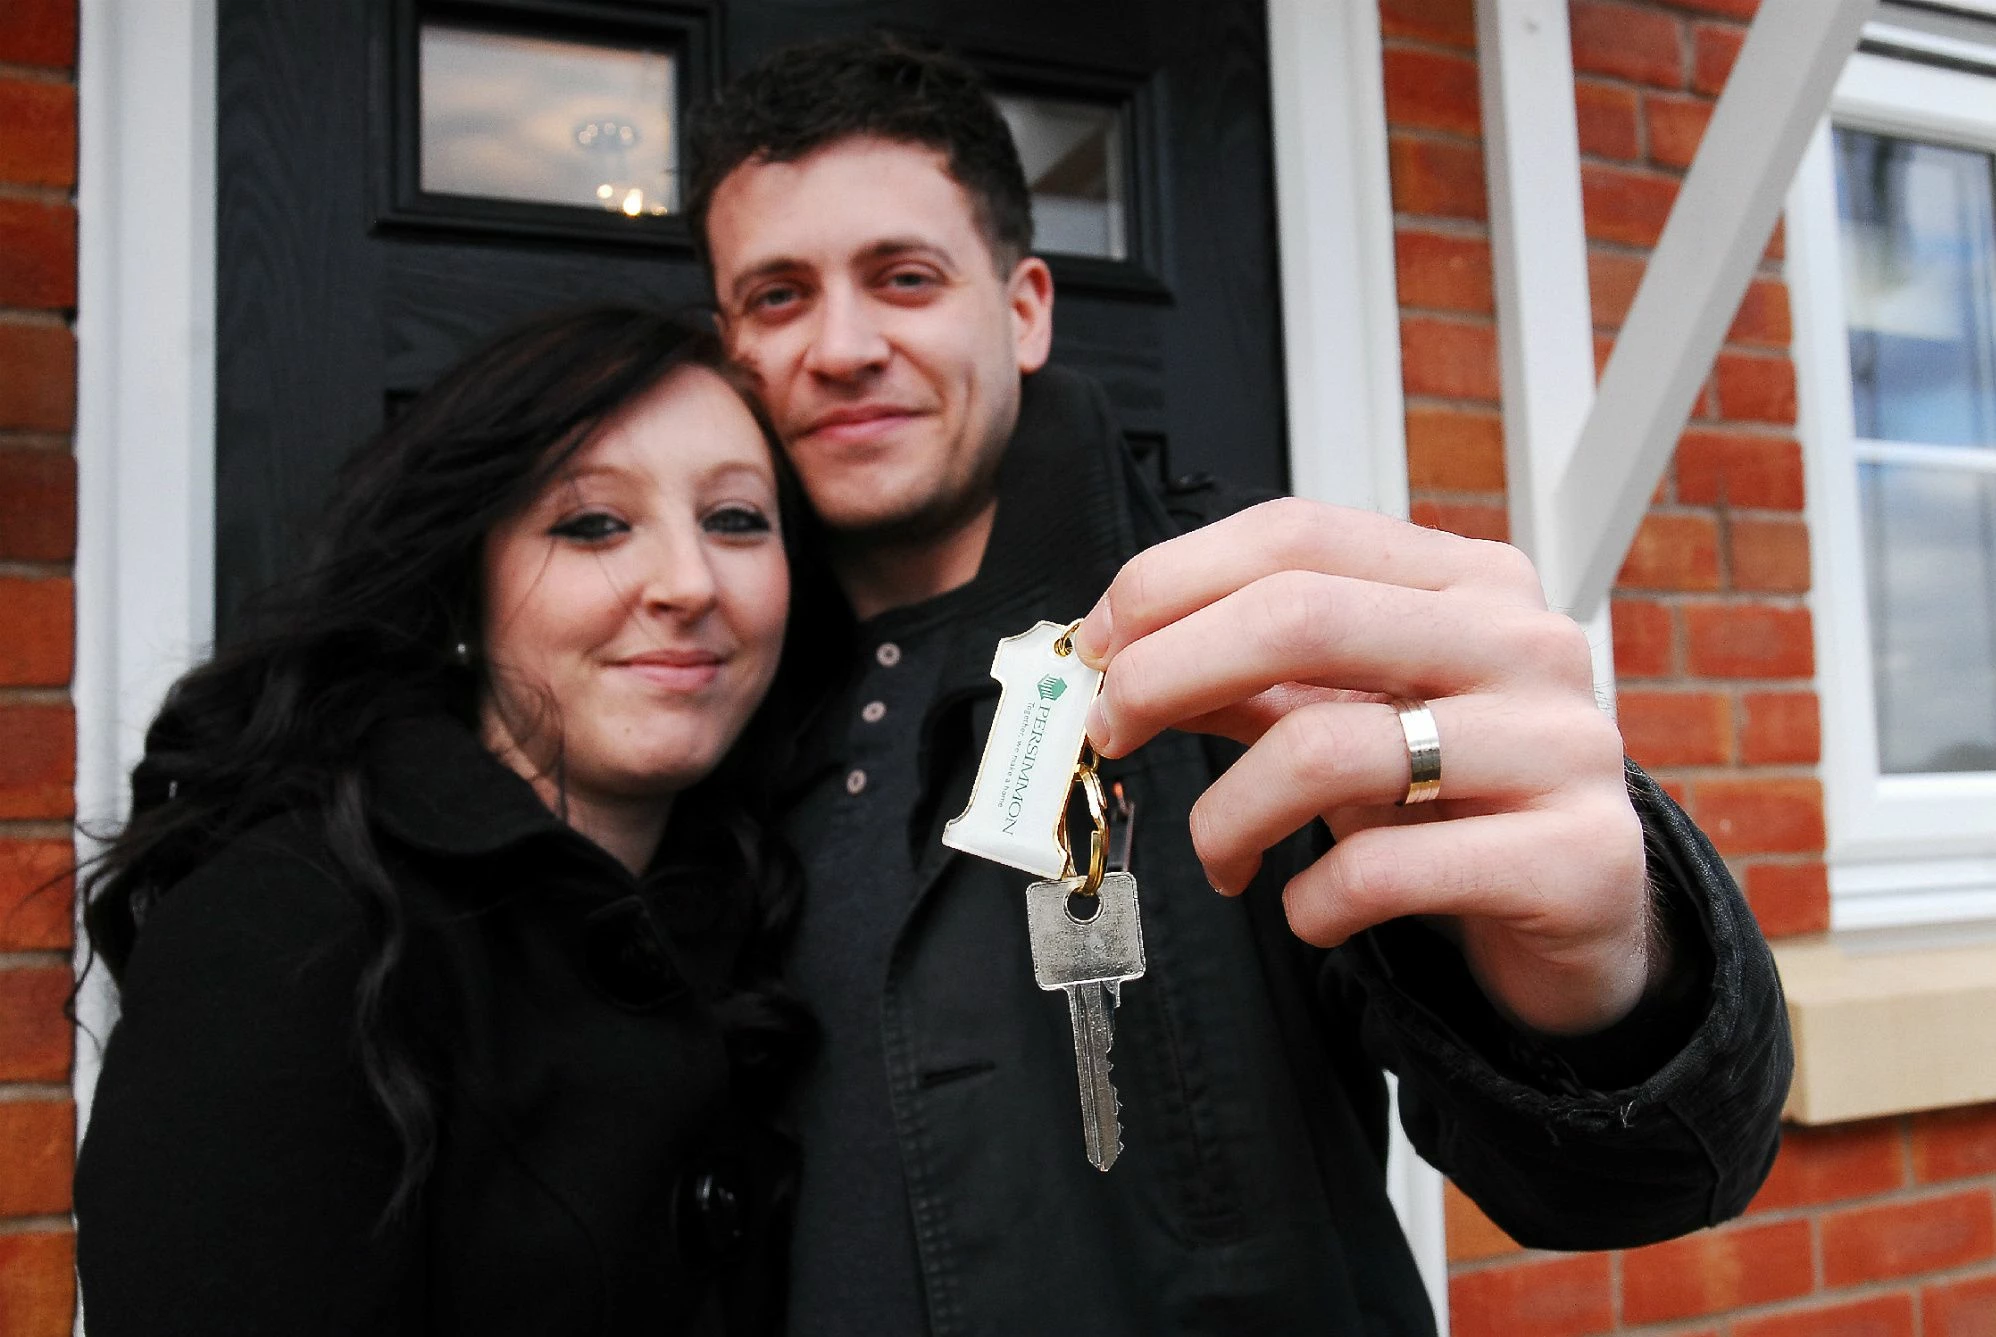 Help to Buy gets young couple on the property ladder